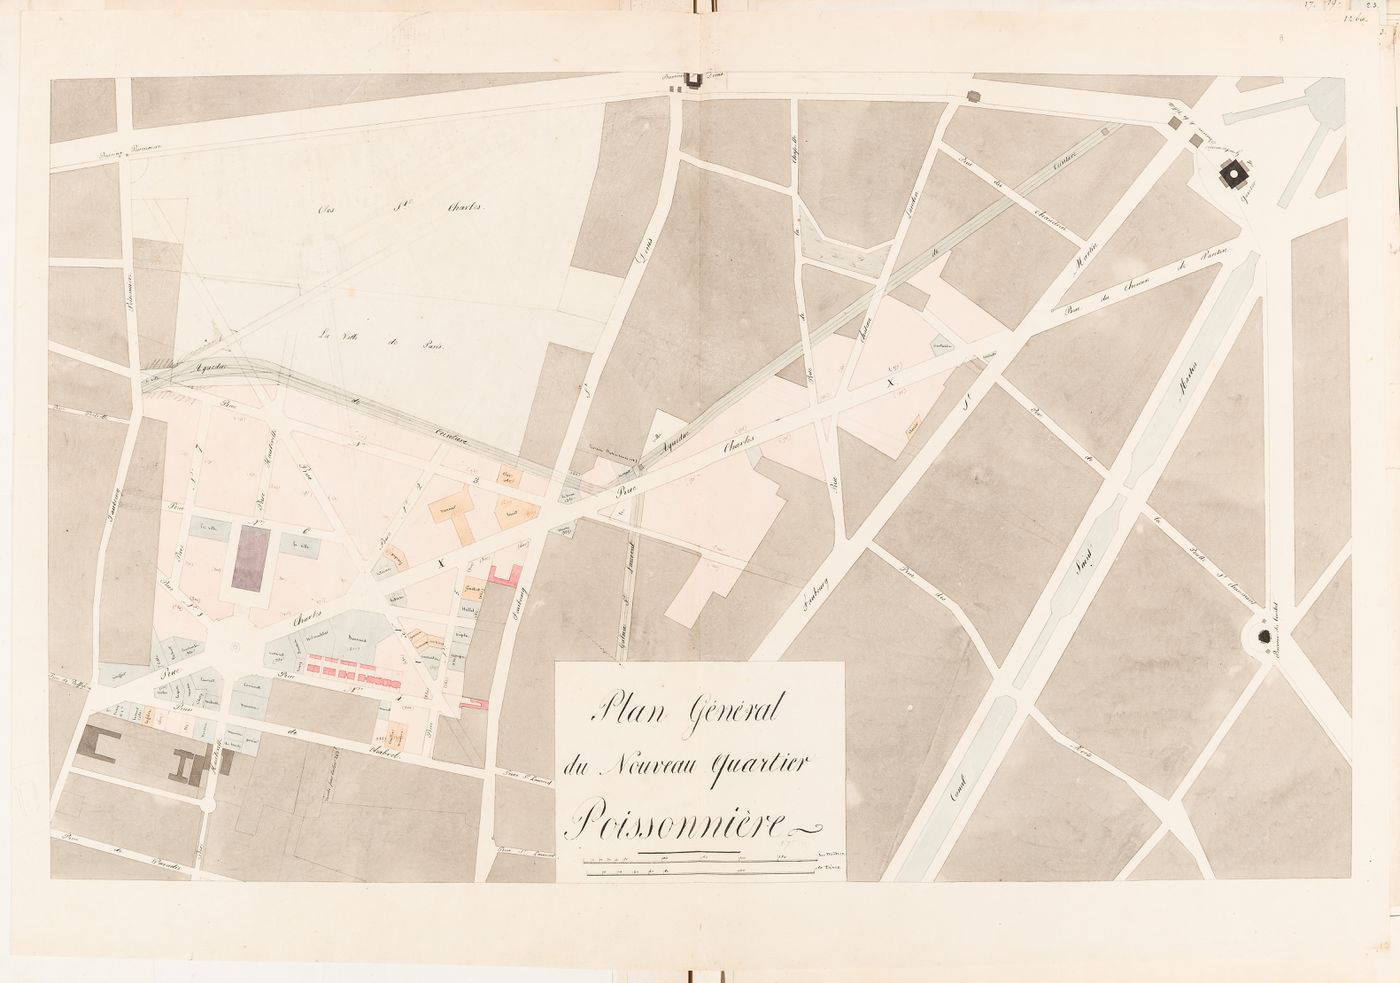 Site plan for the nouveau quartier Poissonnière, including property lots and a block plan for the horse auction house and infirmary, Clos St. Charles